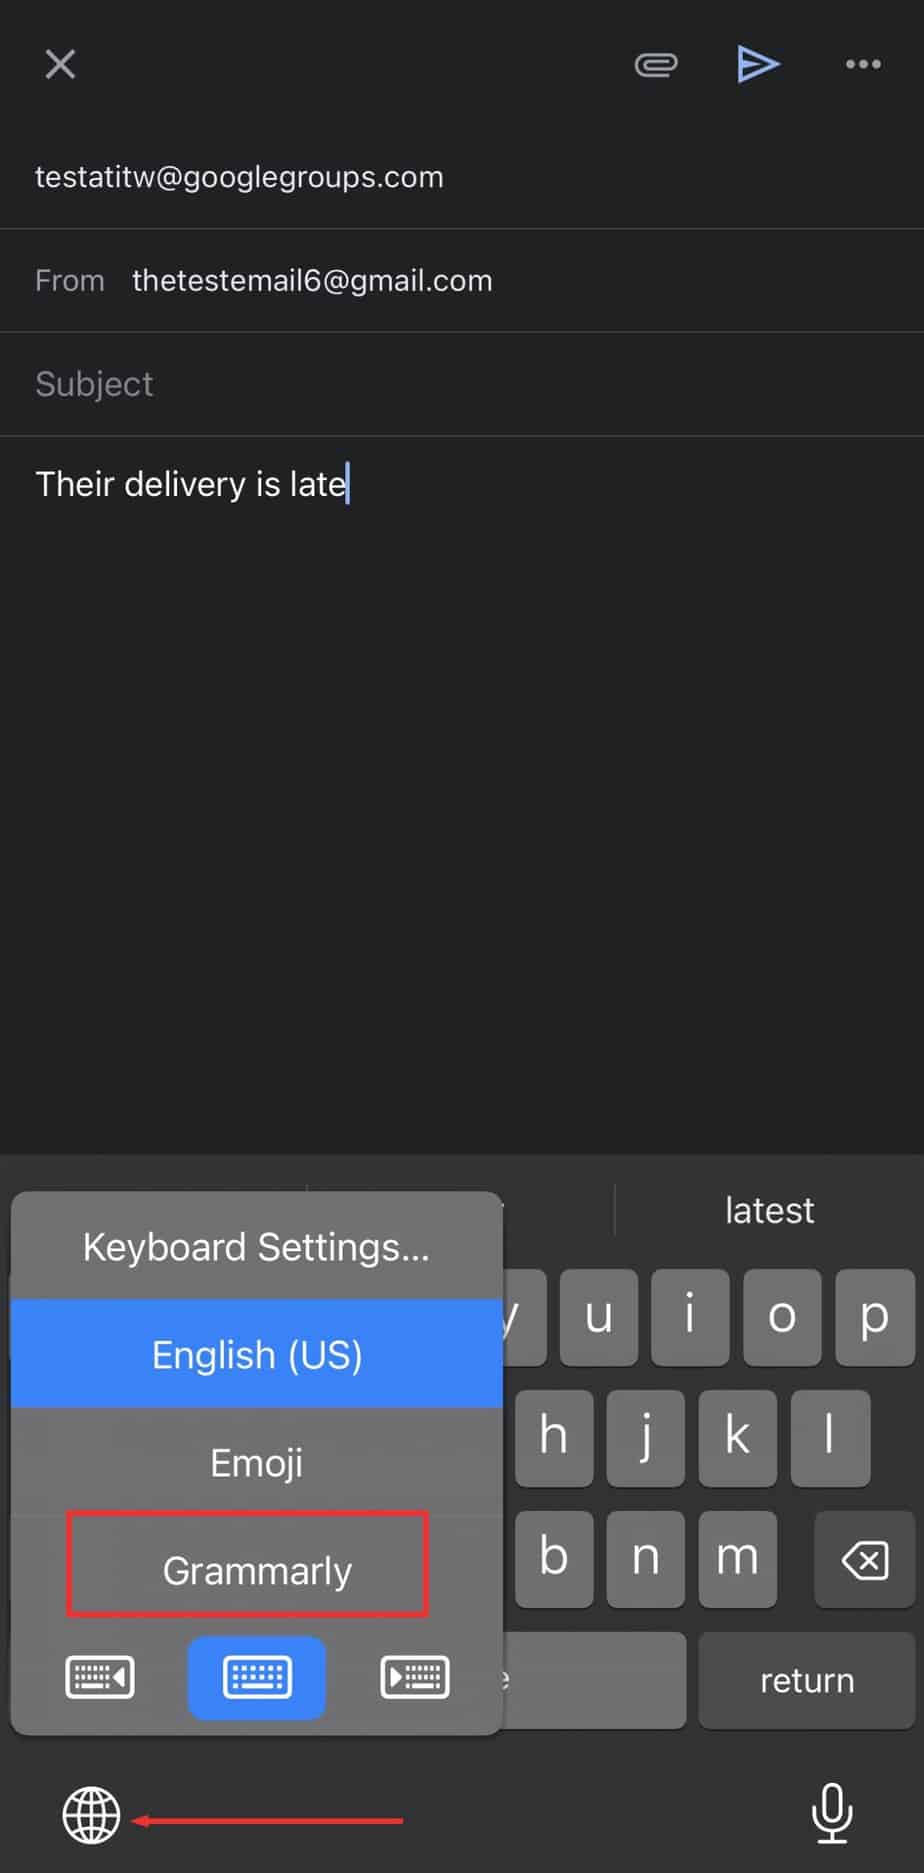 select-grammarly-by-clicking-on-globe-key